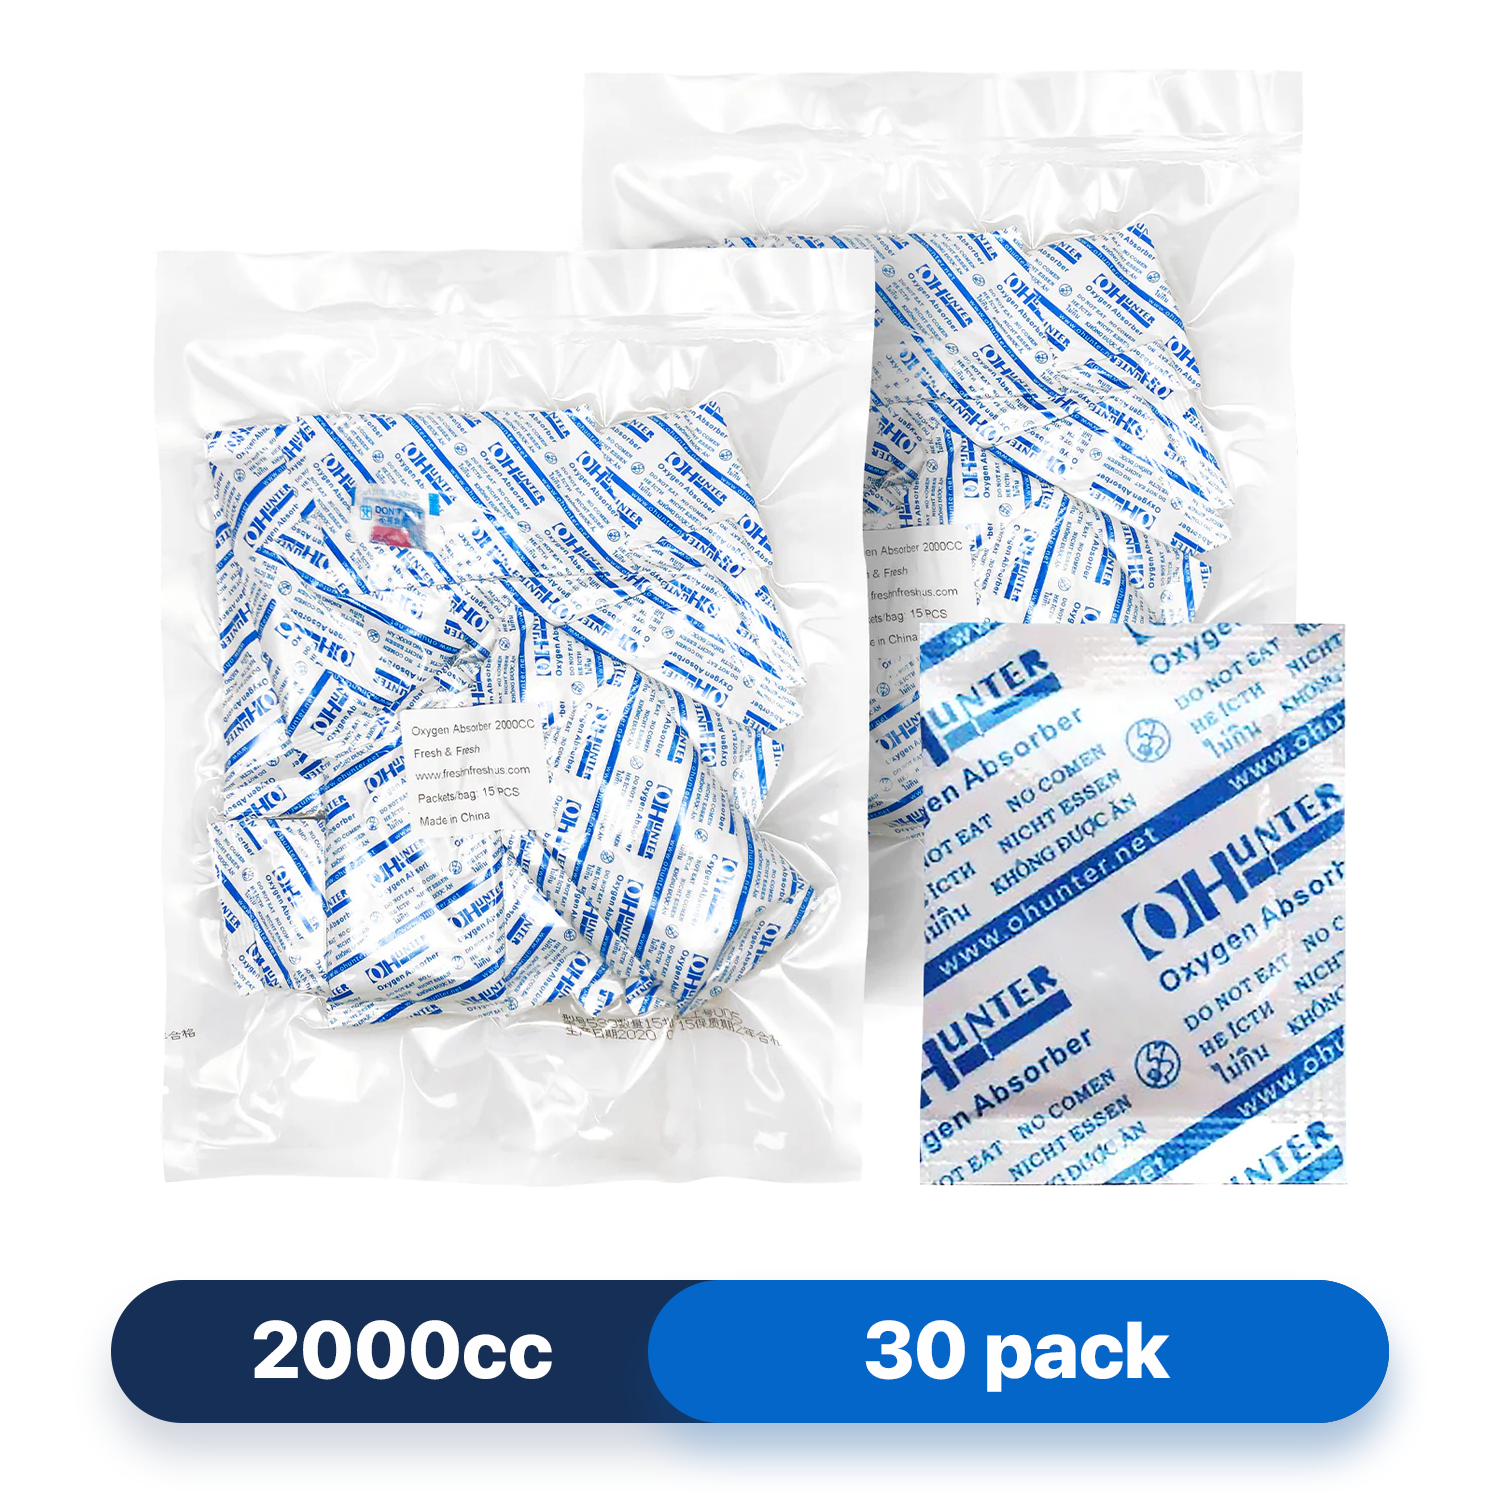 Fresh & Fresh (30 Packets) 2000 CC Premium Oxygen Absorbers(2 Bag of 15 packets) - ISO 9001 Certified Facility Manufactured.